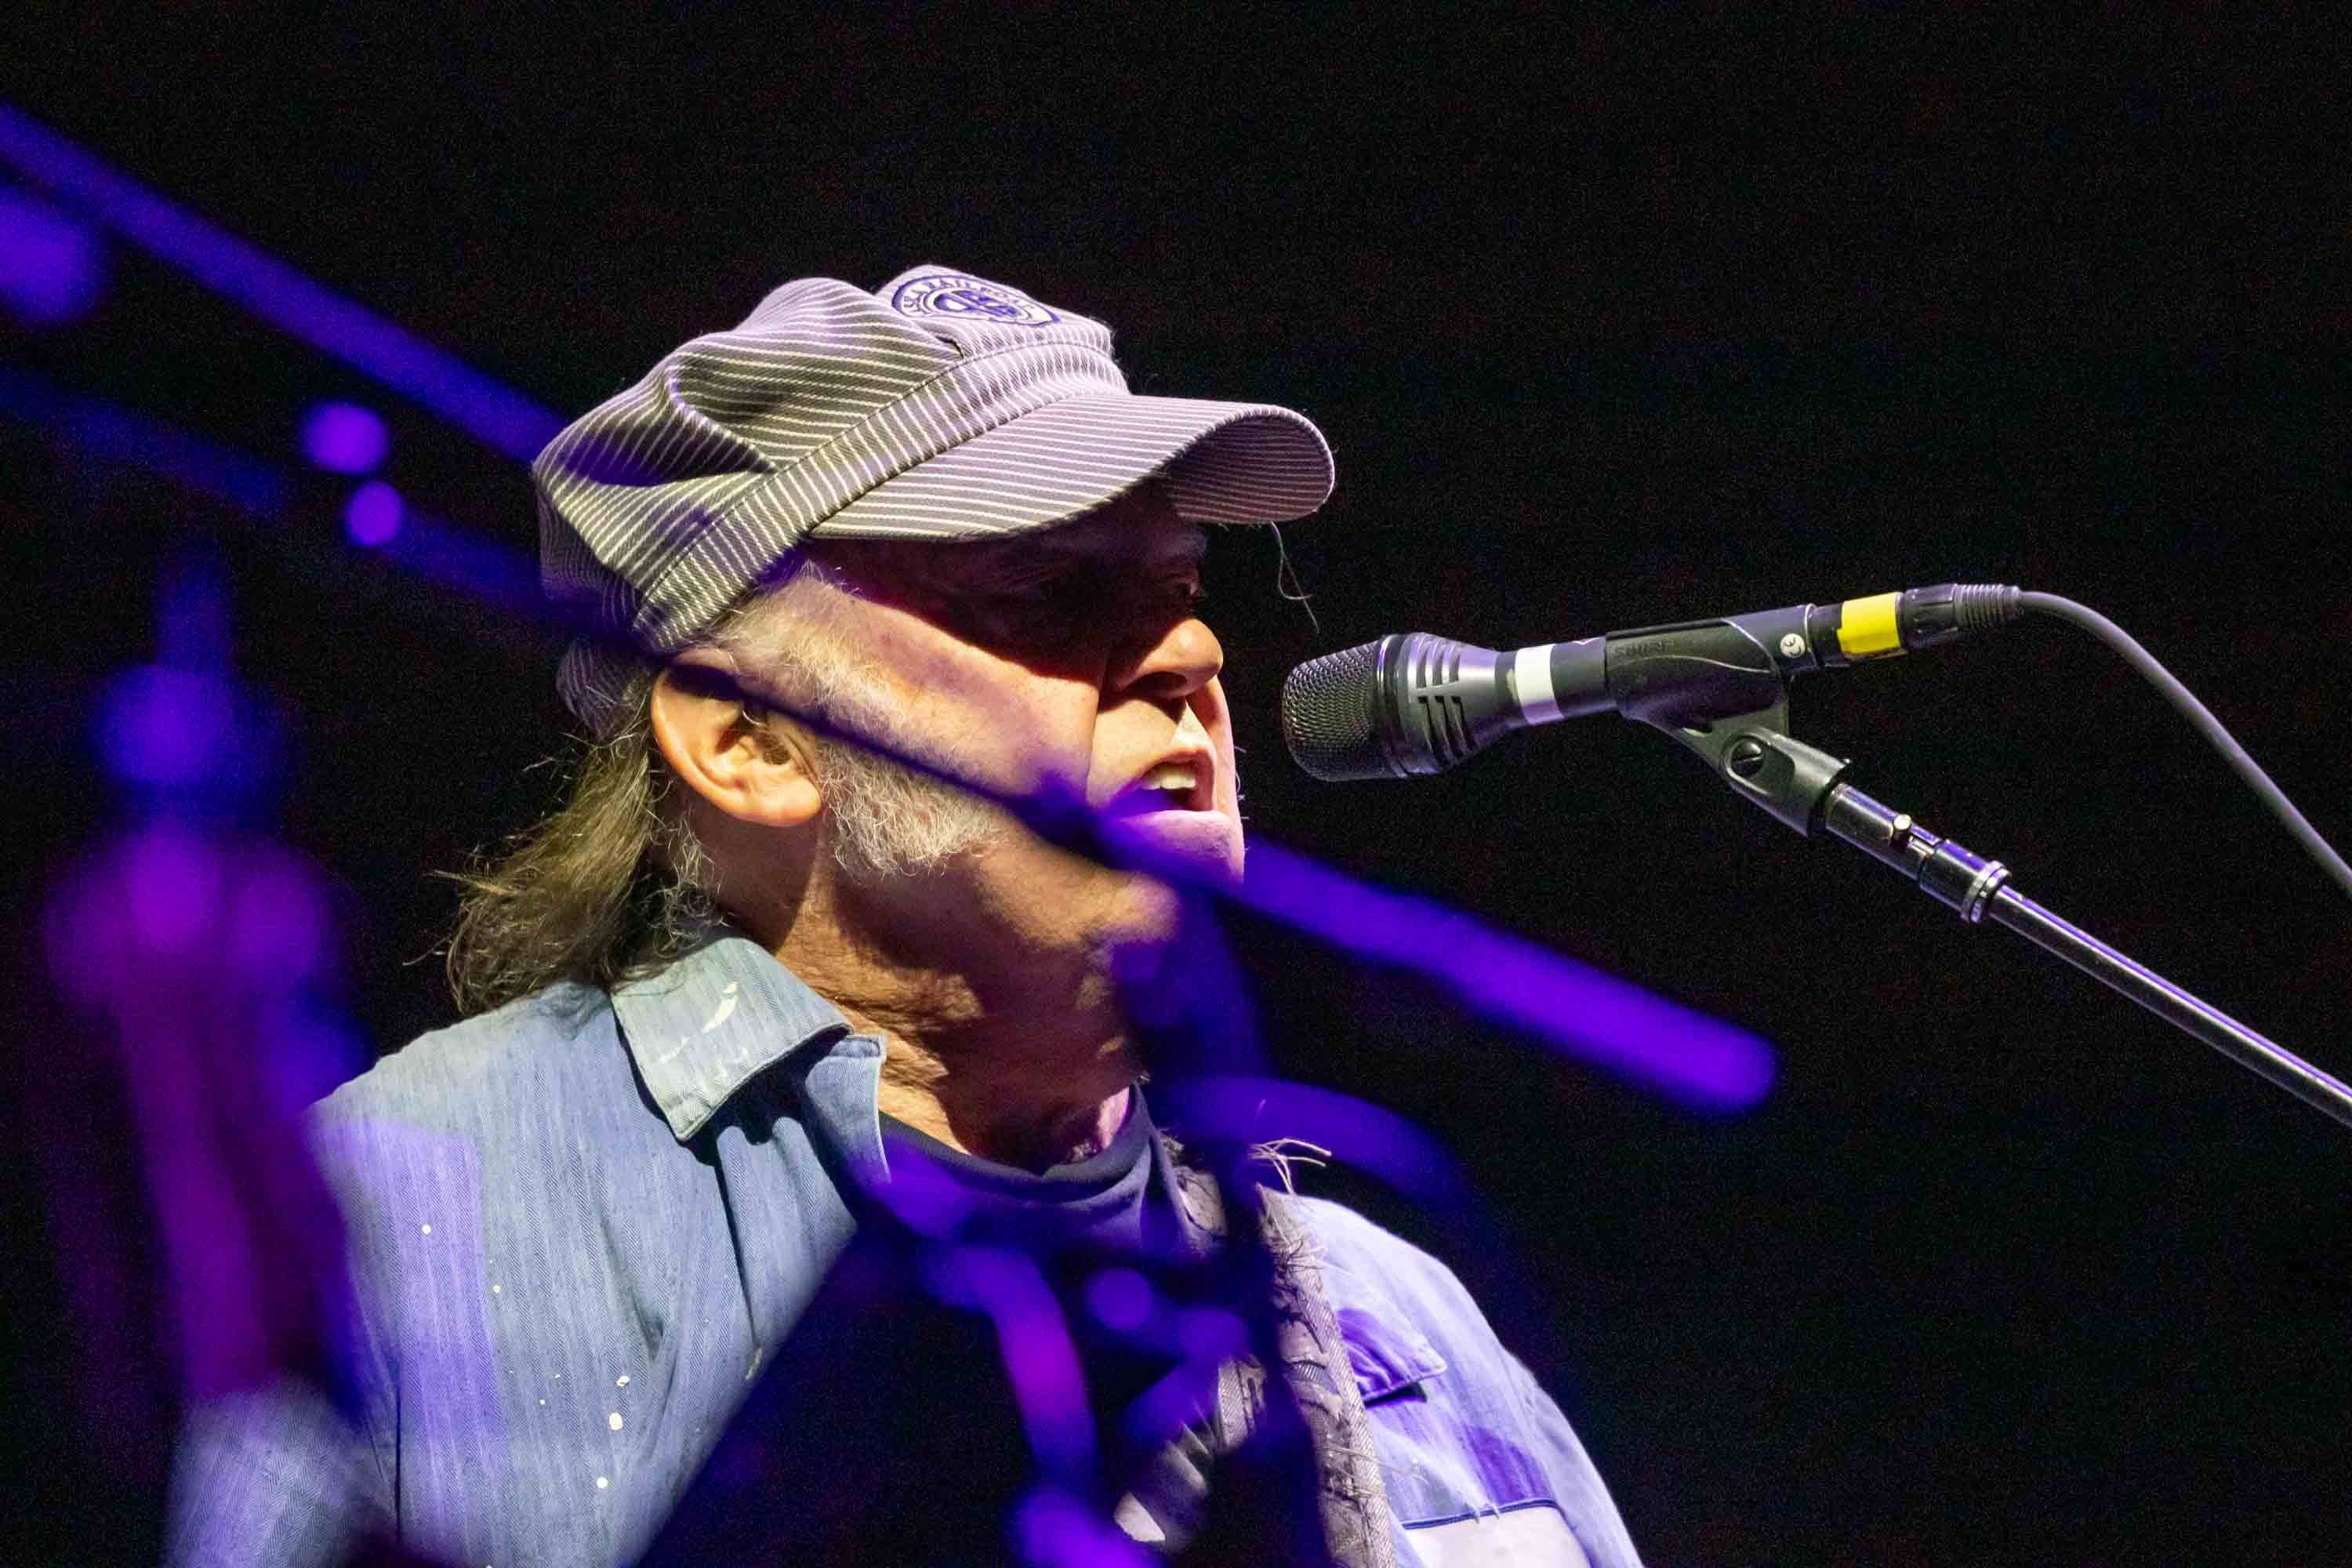 Neil Young concert in Franklin postponed due to inclement weather